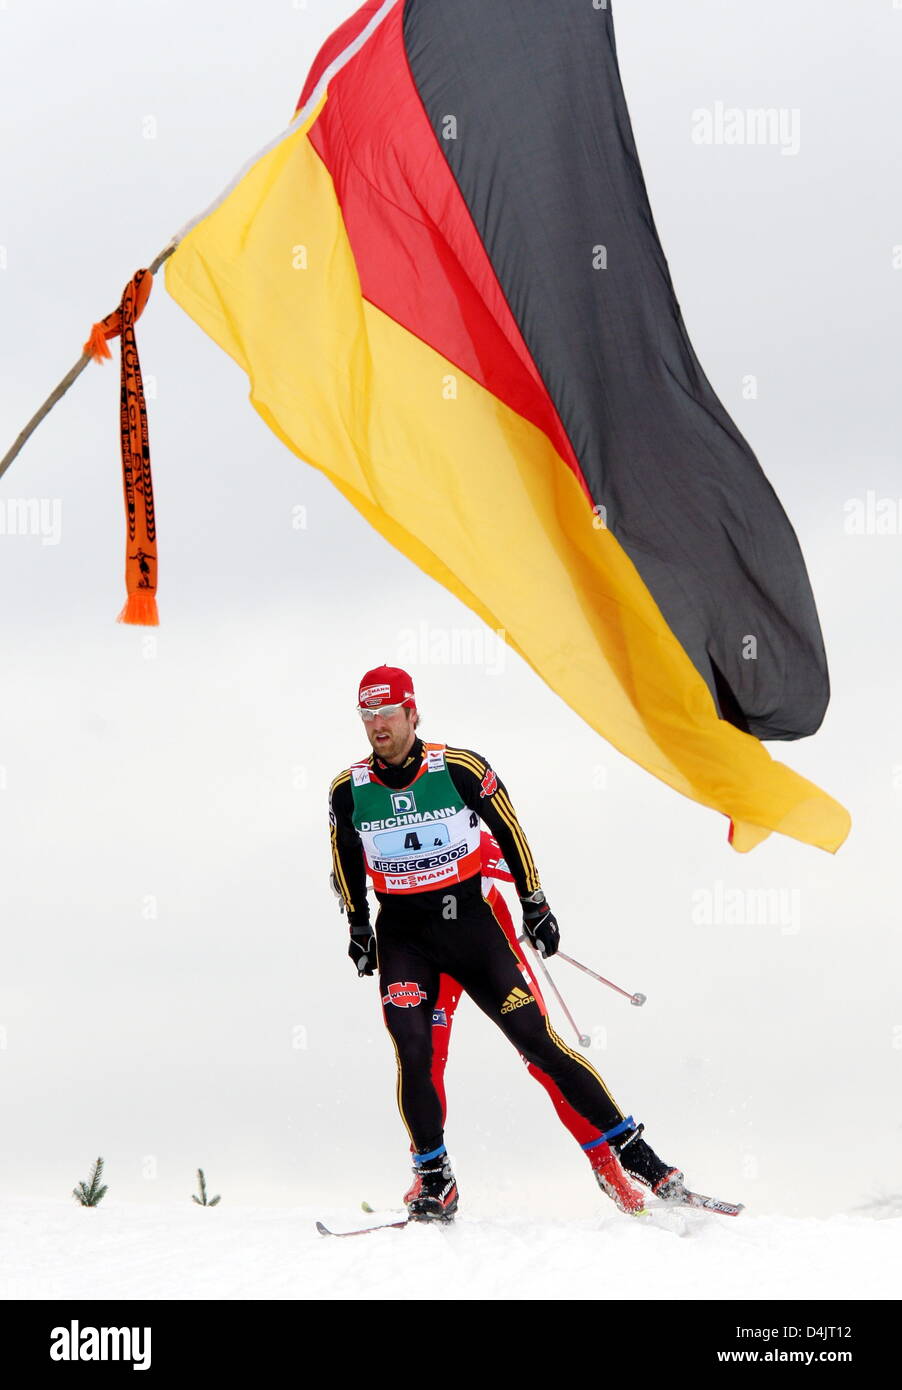 Germany?s Axel Teichmann competes in the men?s cross-country skiing relay competition at the FIS Nordic World Ski Championships in Liberec, Czech Republic, 27 February 2009. Norway won ahead of Germany. Photo: Kay Nietfeld Stock Photo